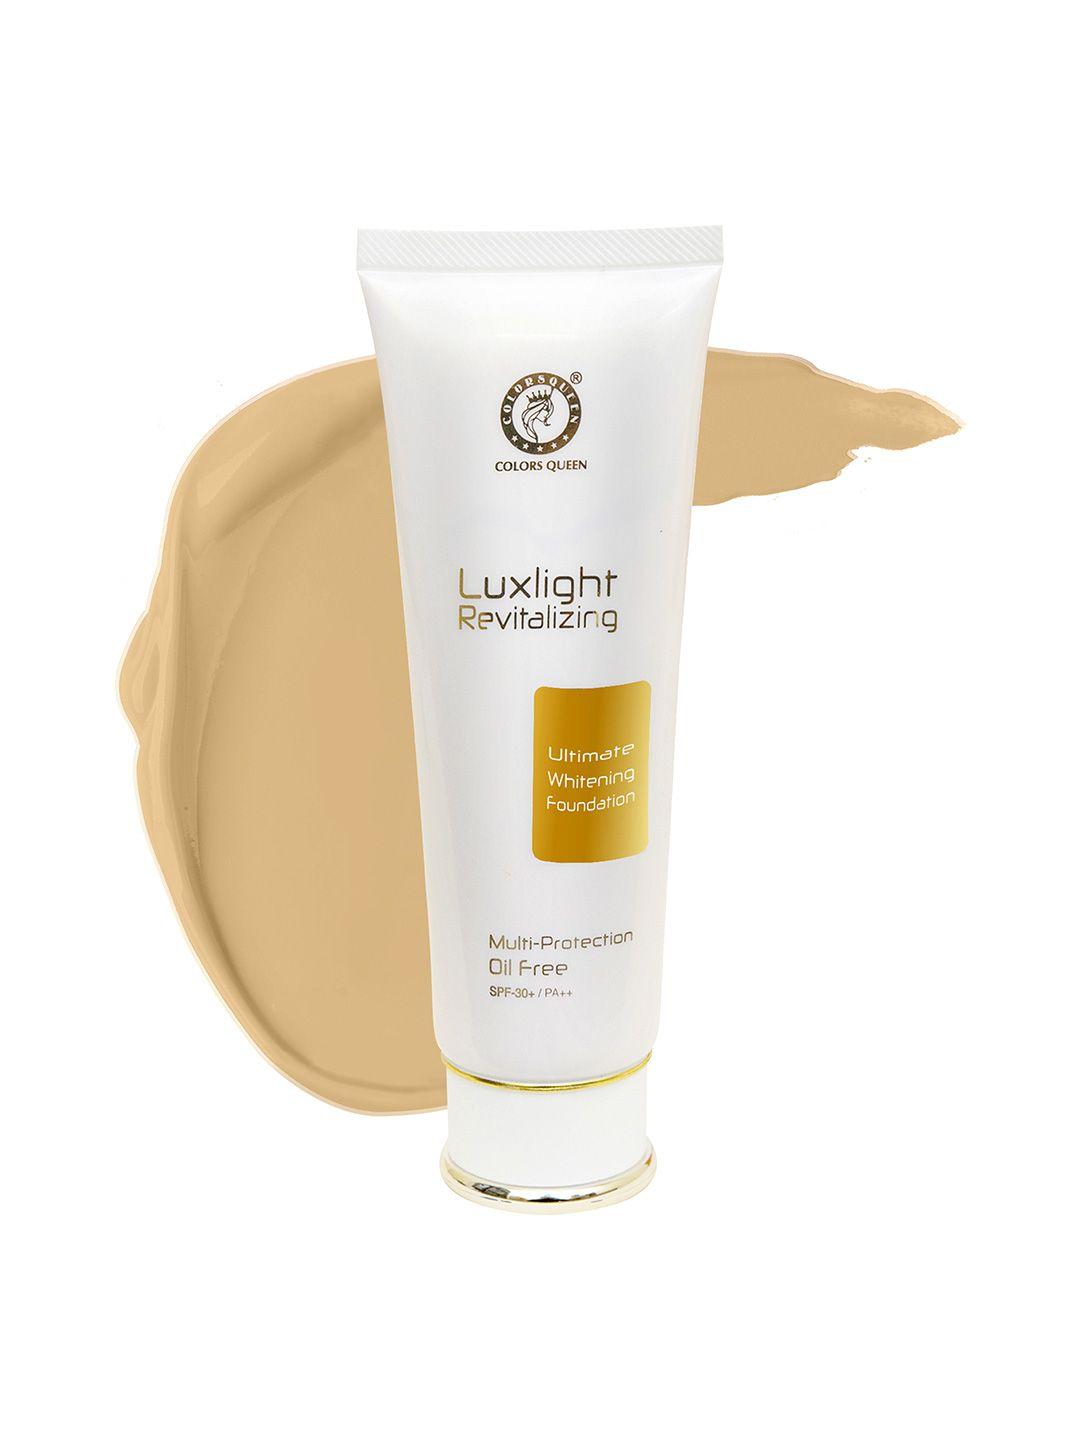 colors queen luxlight revitalizing ultimate whitening spf 30+ foundation 50g-cool ivory 02